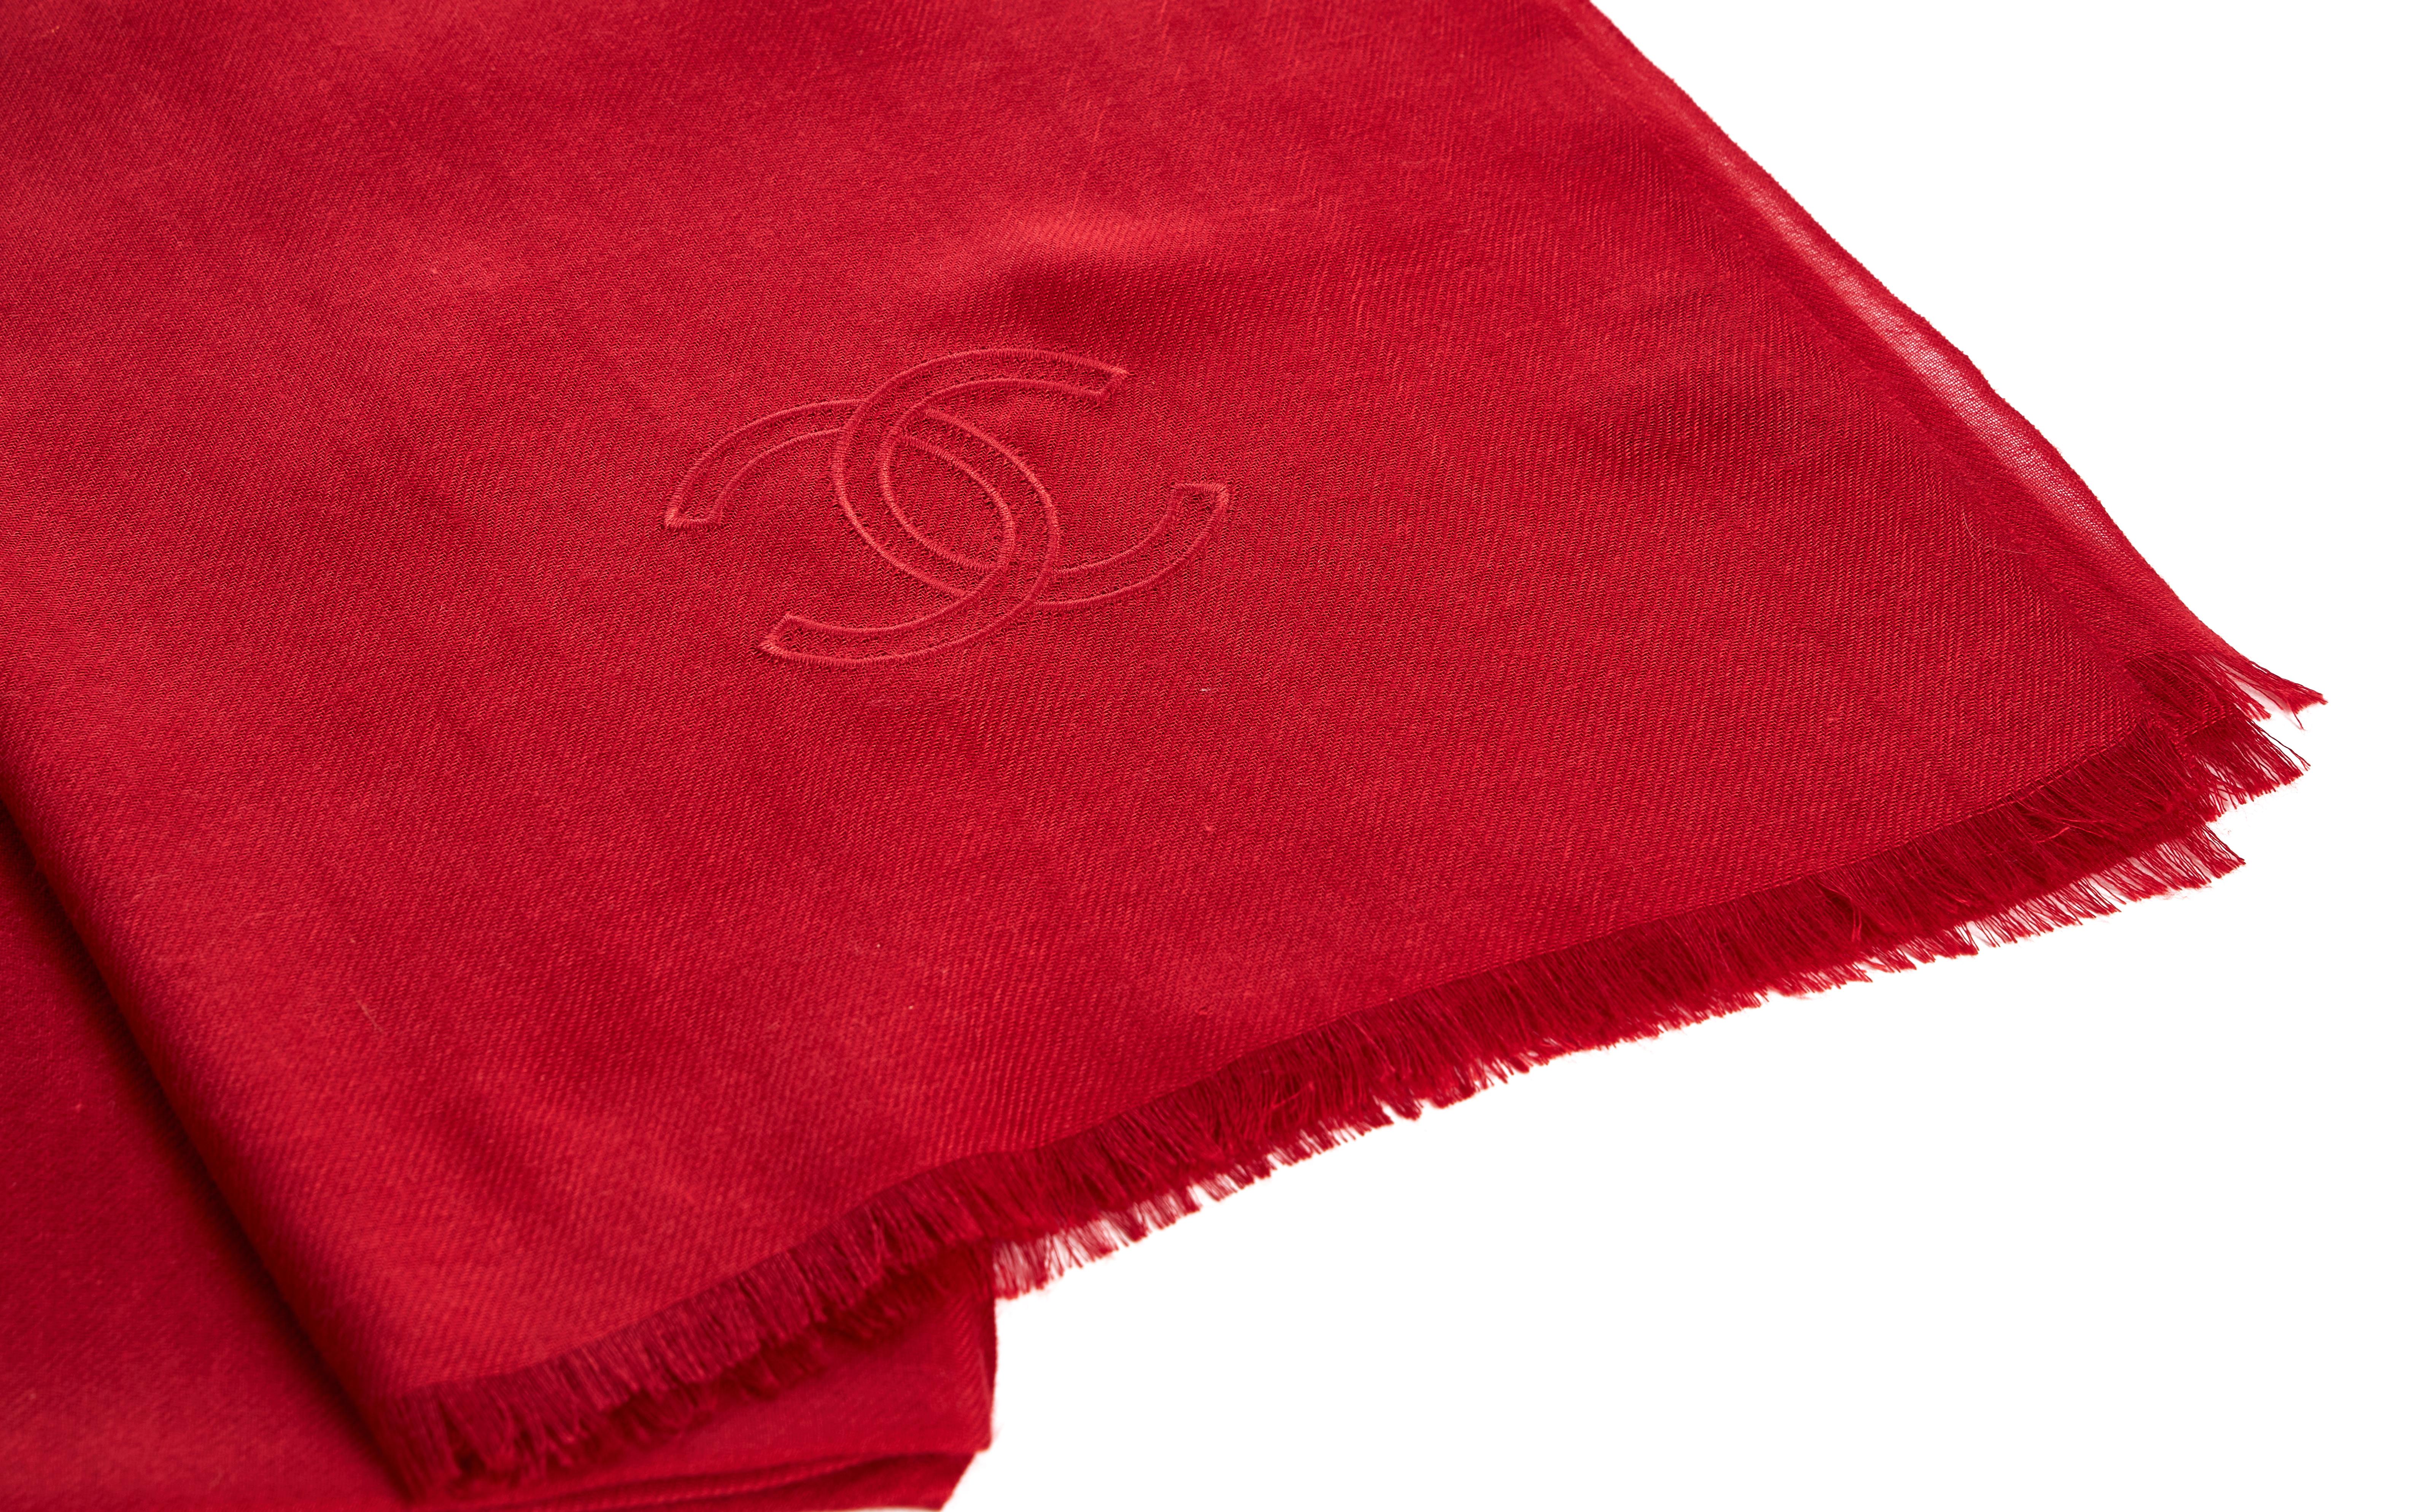 Chanel brand new red cashmere shawl with cc embroidered logo. 70% cashmere, 30% silk. Comes with original care tag.